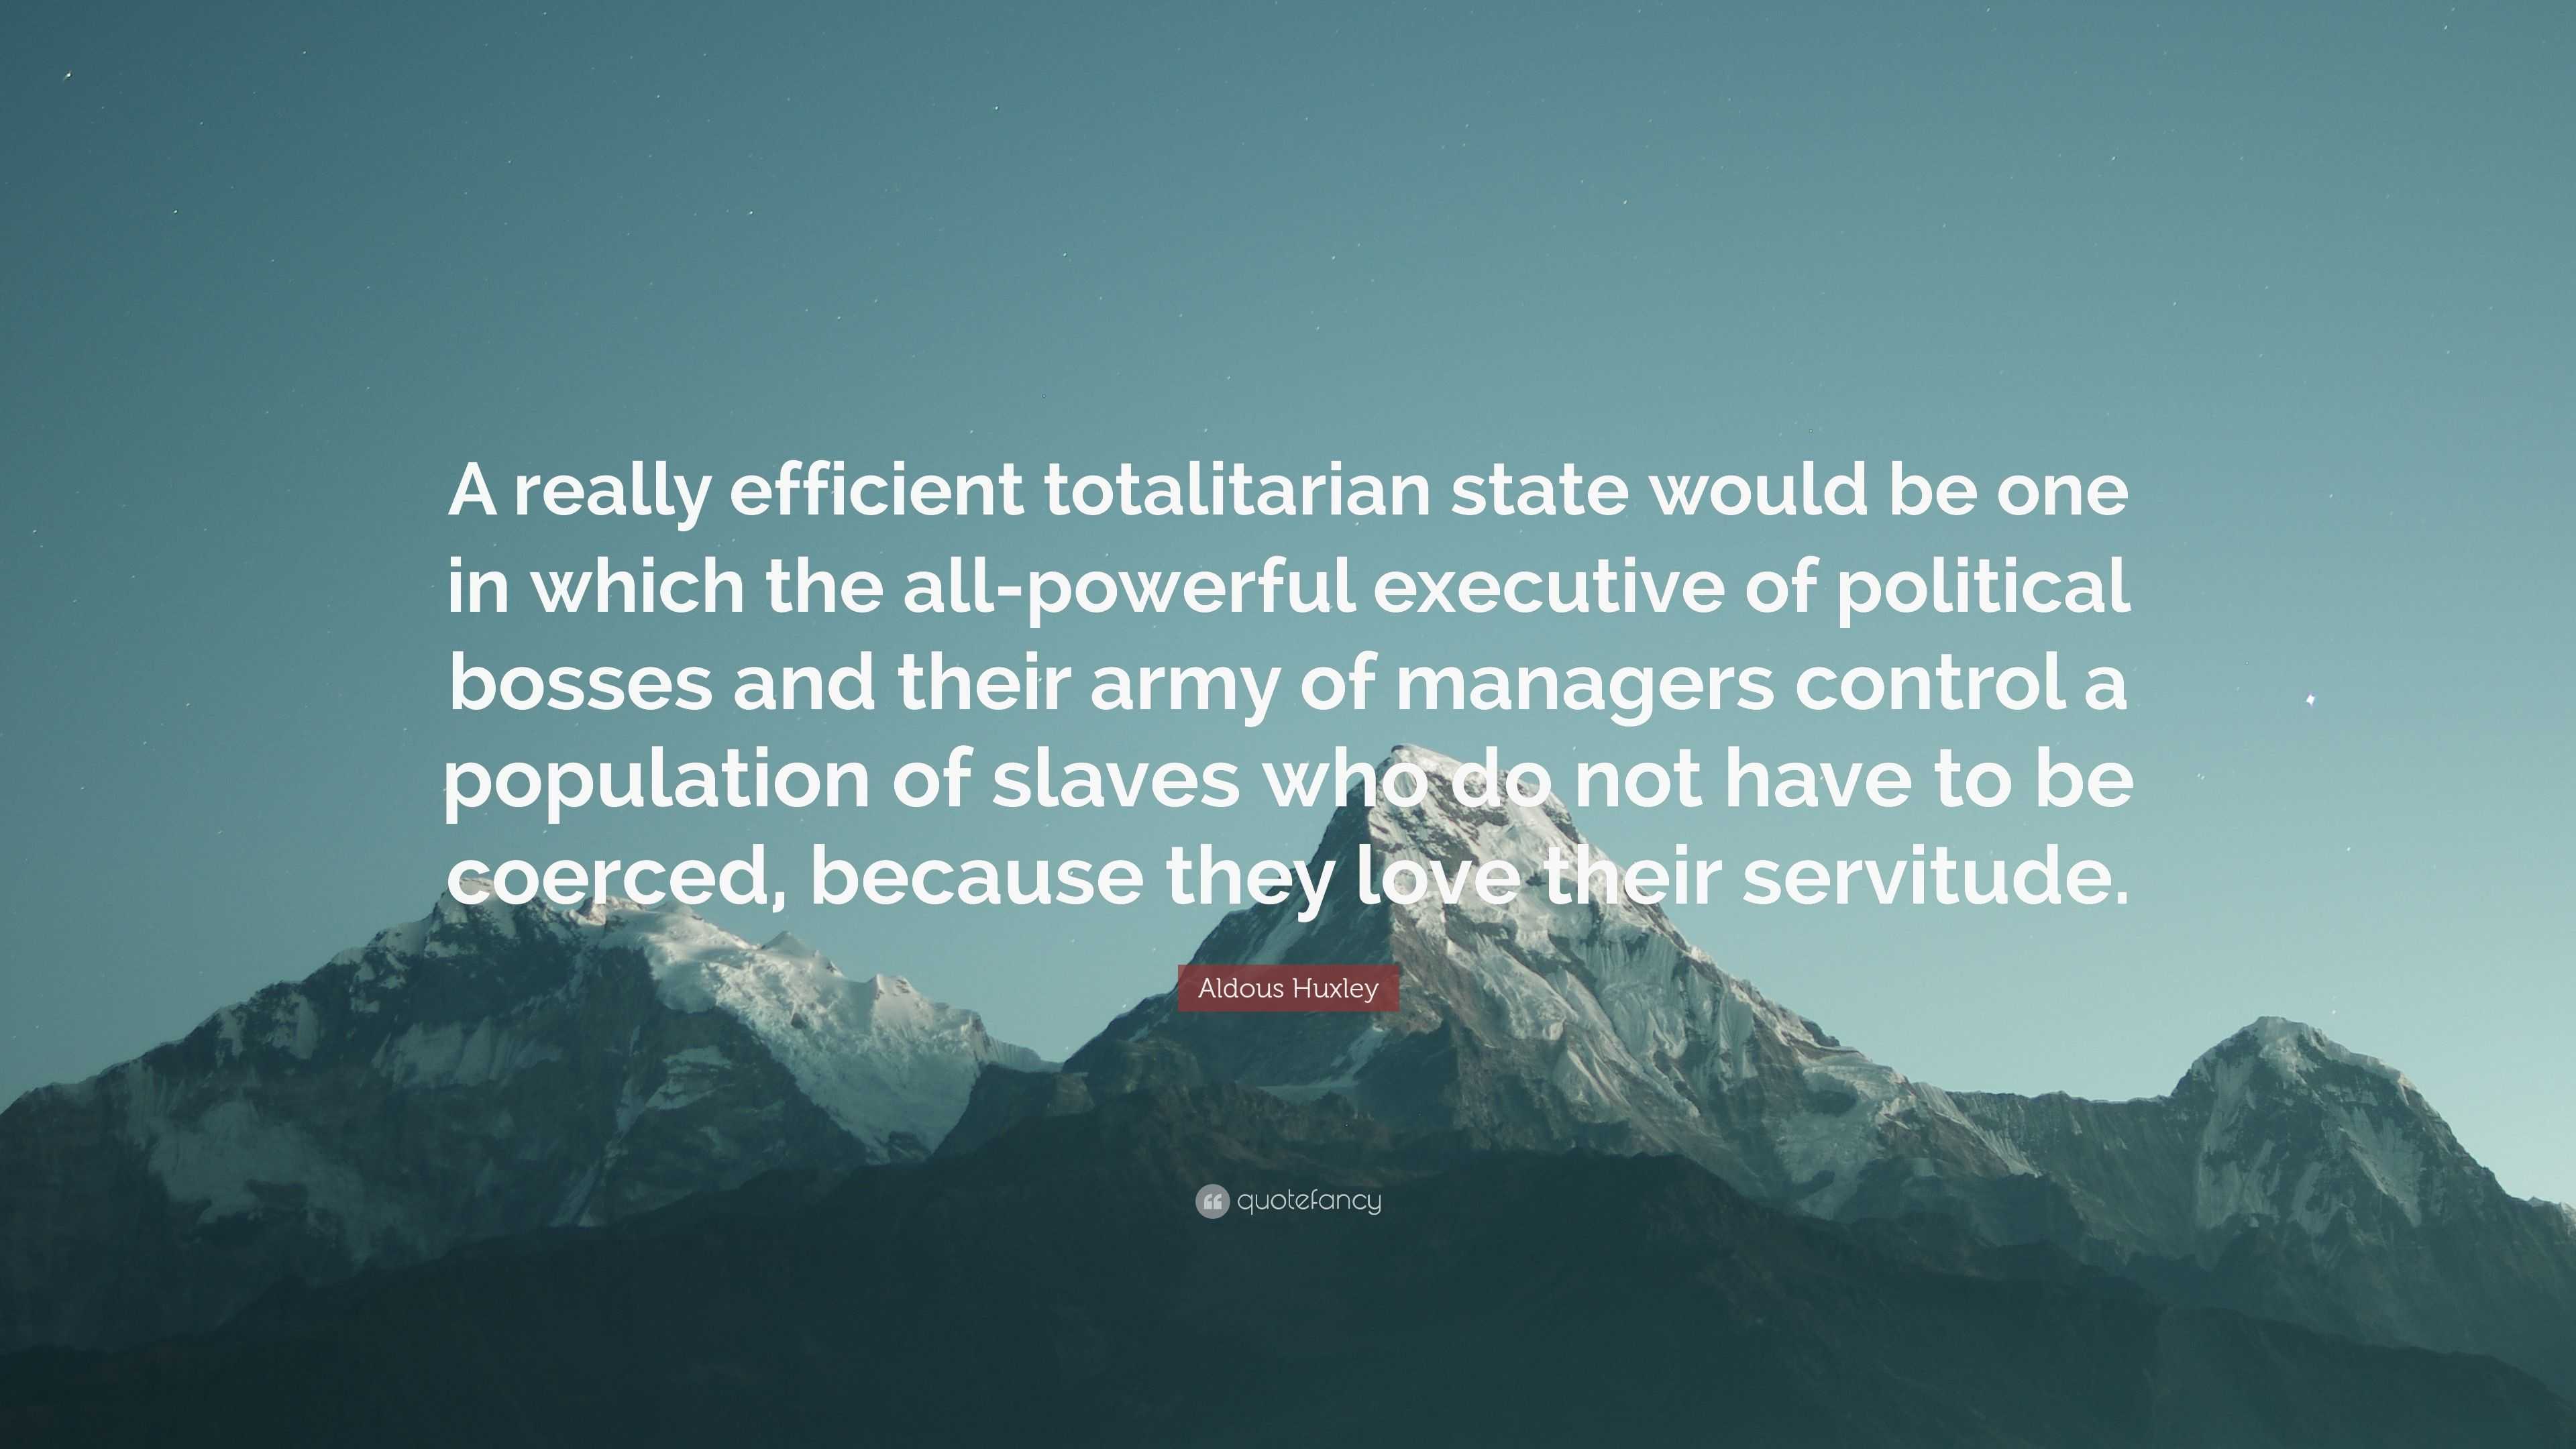 Aldous Huxley Quote: “A really efficient totalitarian state would ...